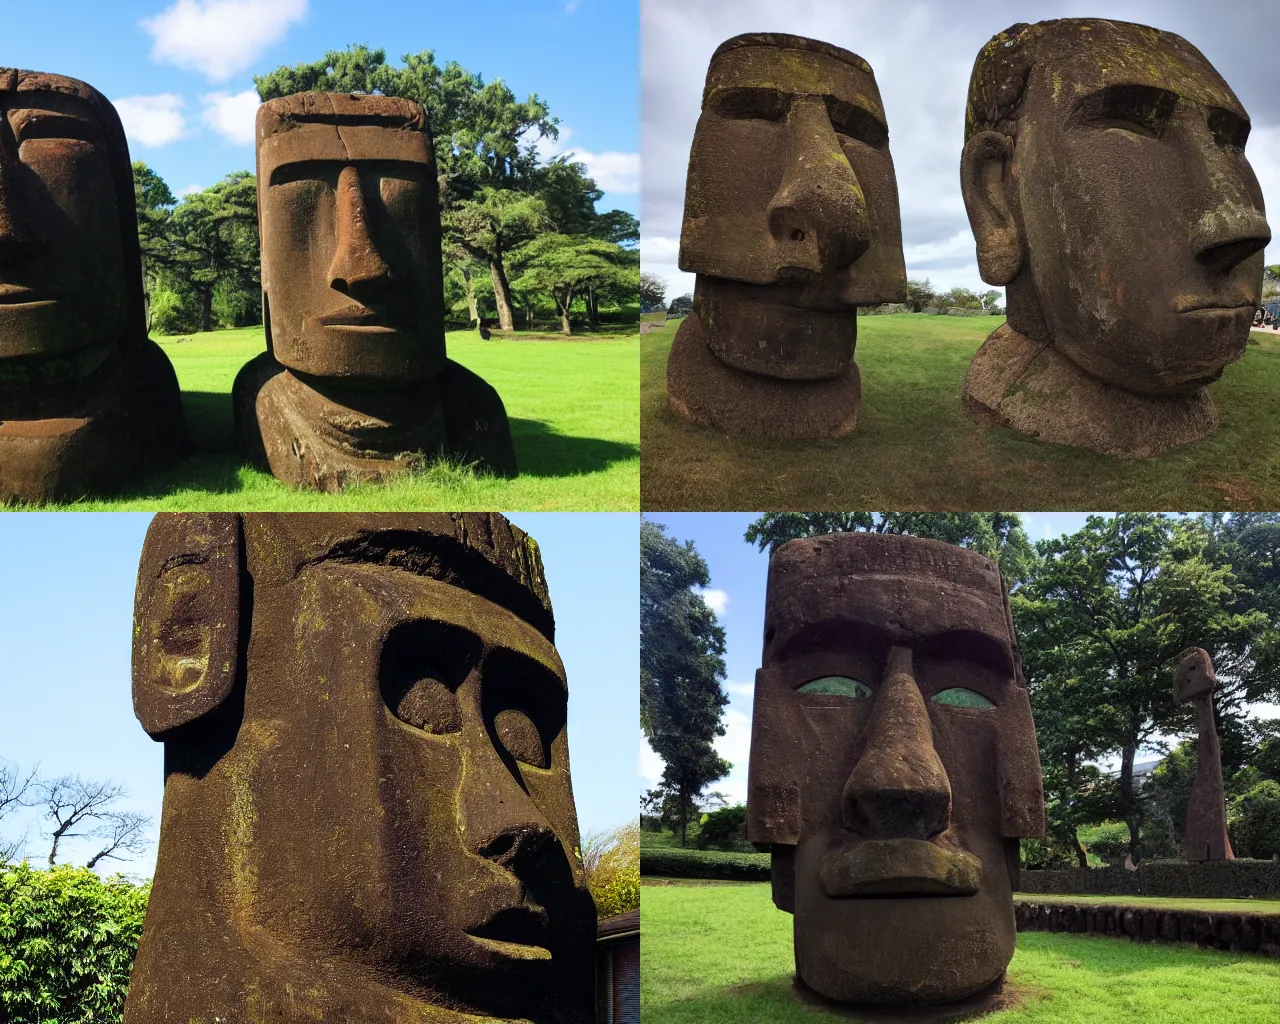 Prompt: A moai statue of Linus Torvalds